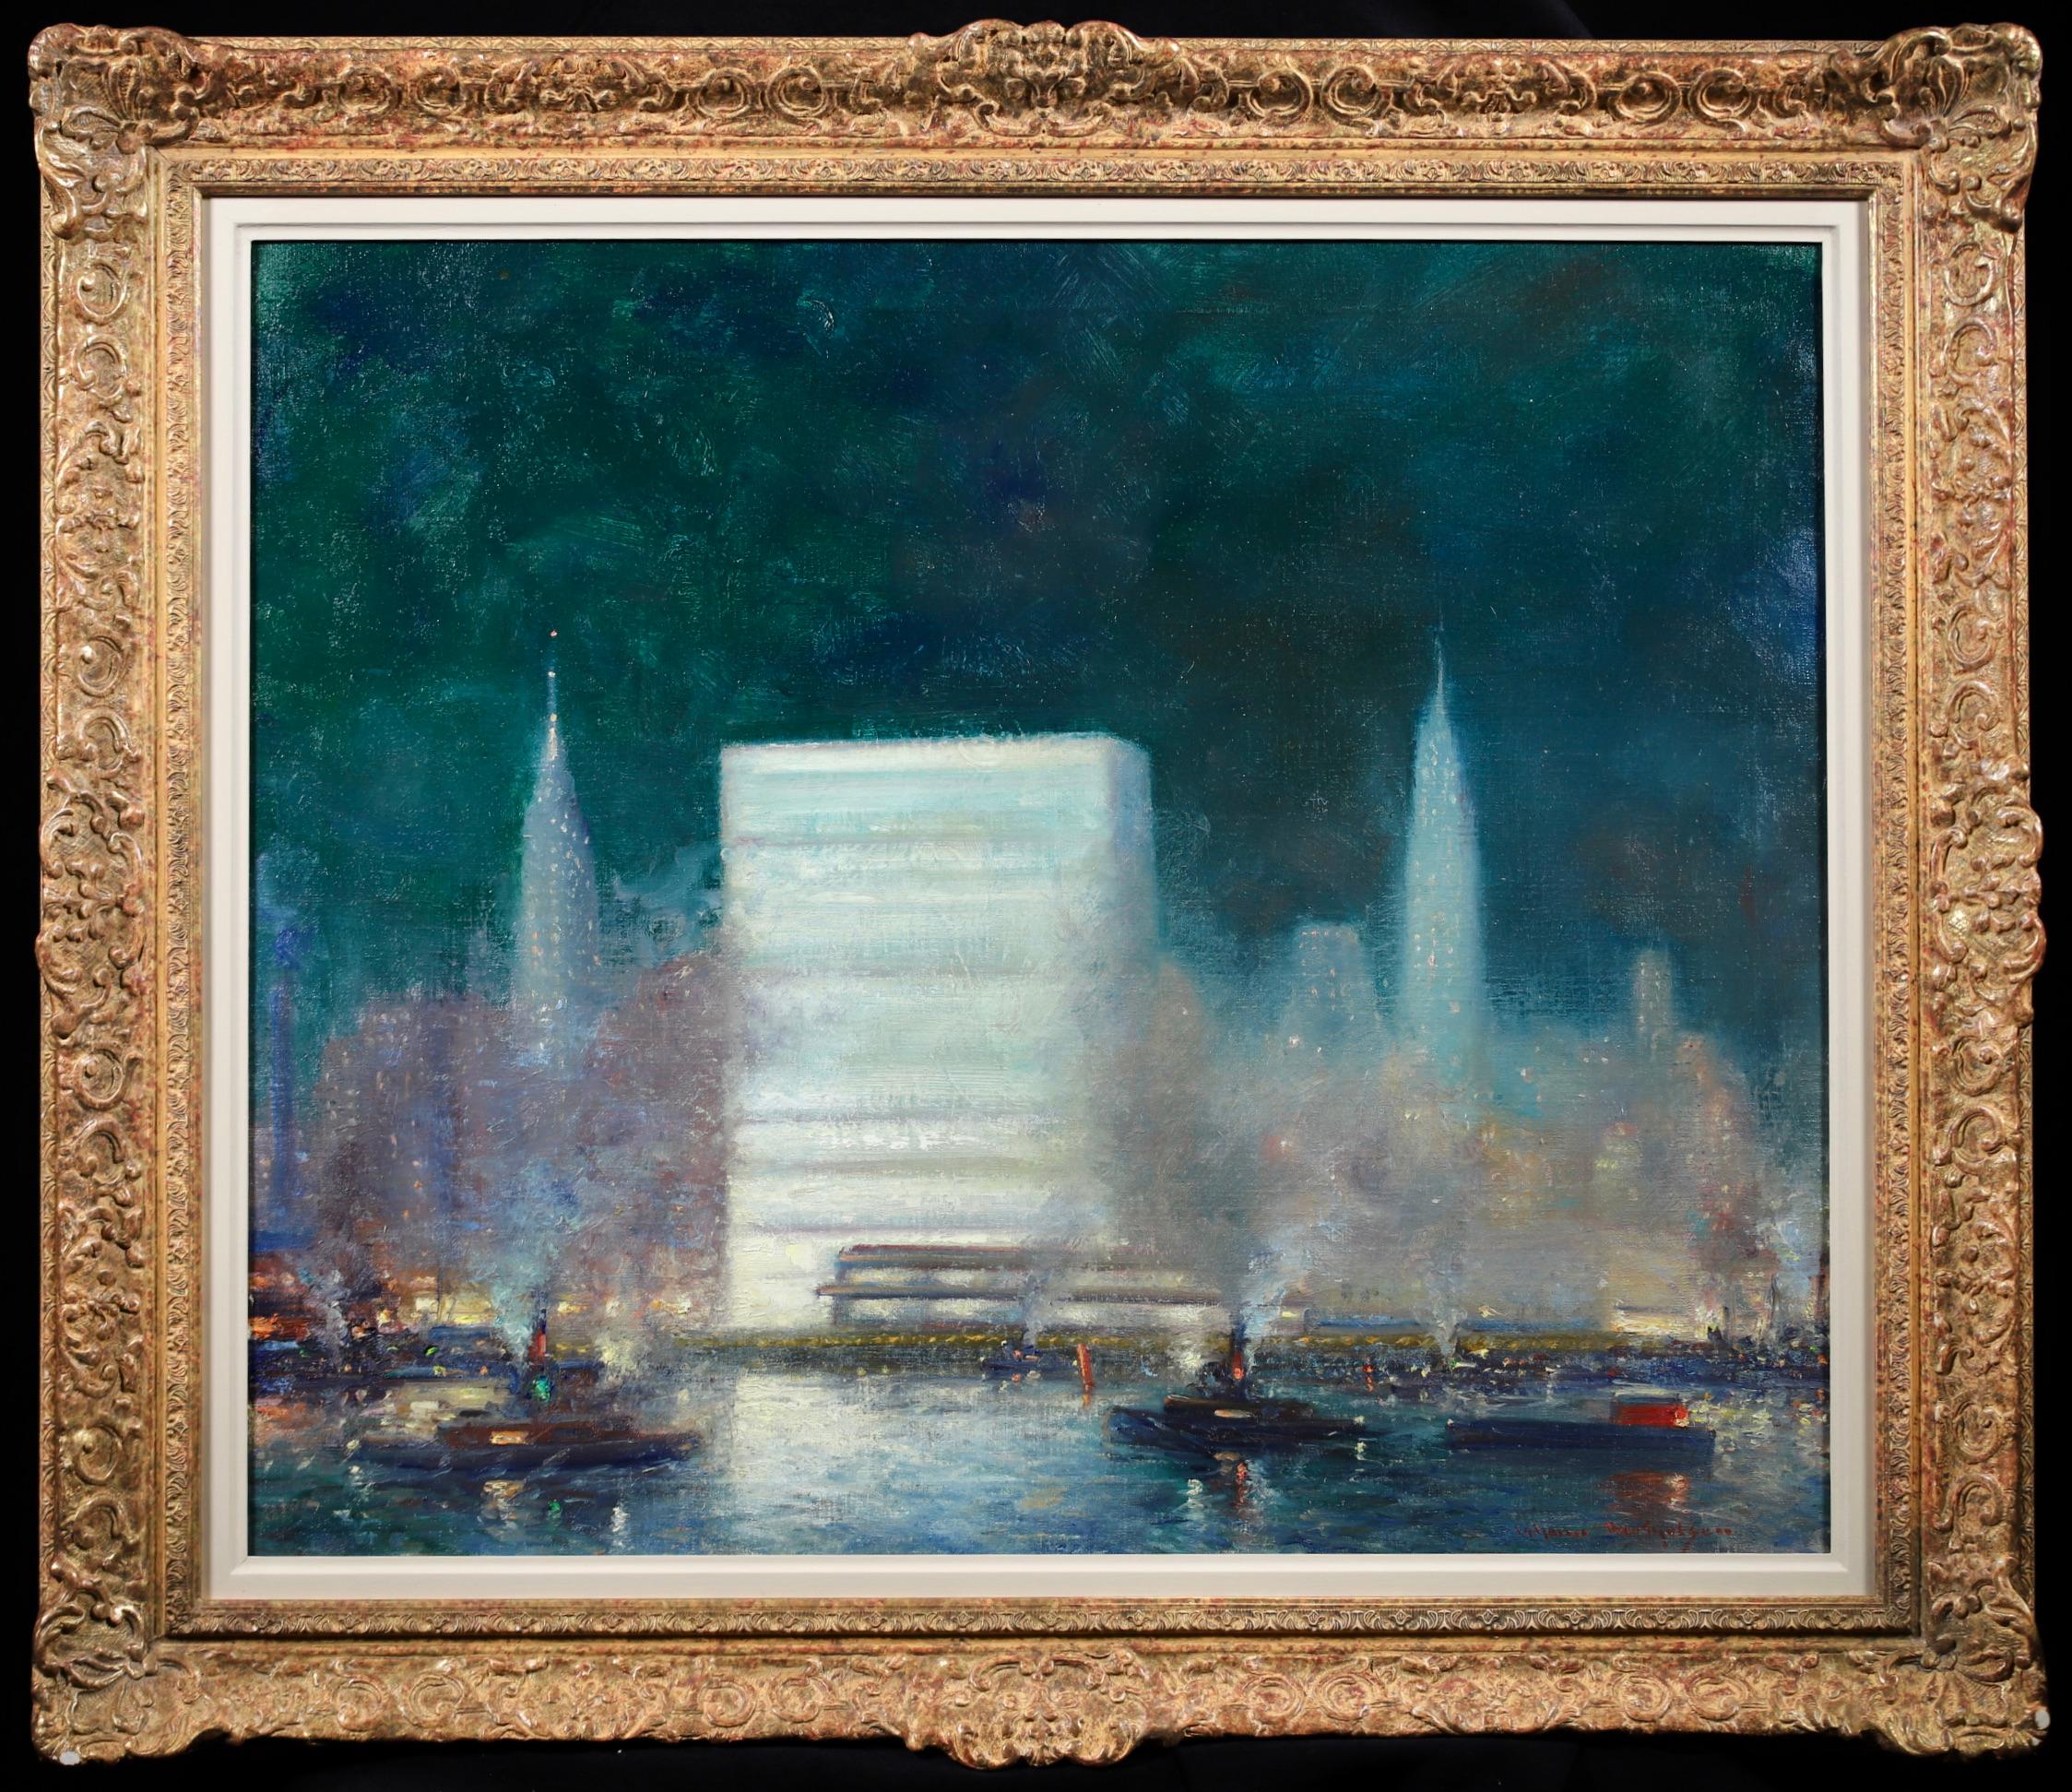 Stunning oil on canvas circa 1955 by American impressionist painter Johann Henrik Carl Berthelsen. The piece depicts a view of the illuminated waterfront buildings from the East River in New York - specifically the then newly completed United